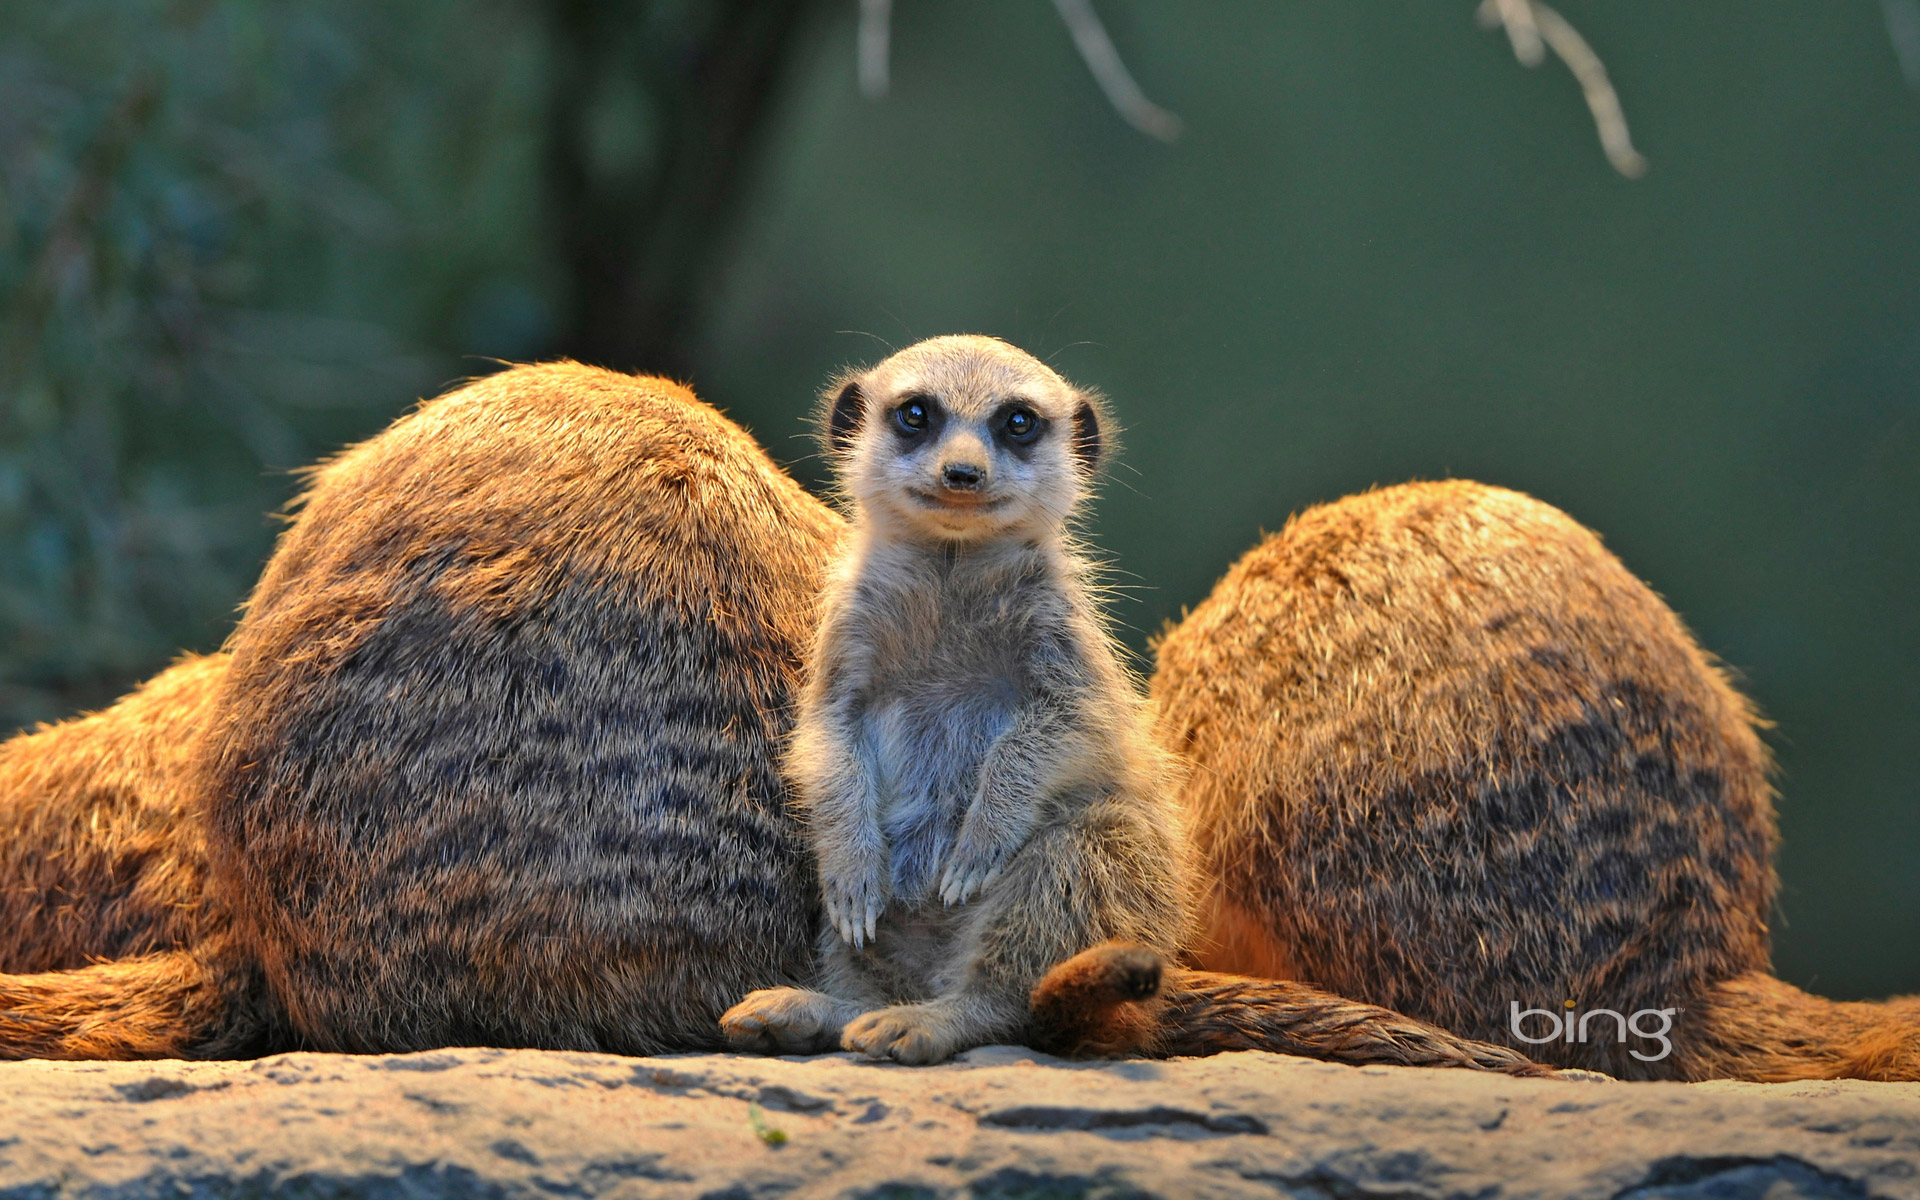 Meerkat Widescreen Wallpaper - Advantages And Disadvantages Of Technology Quotes , HD Wallpaper & Backgrounds